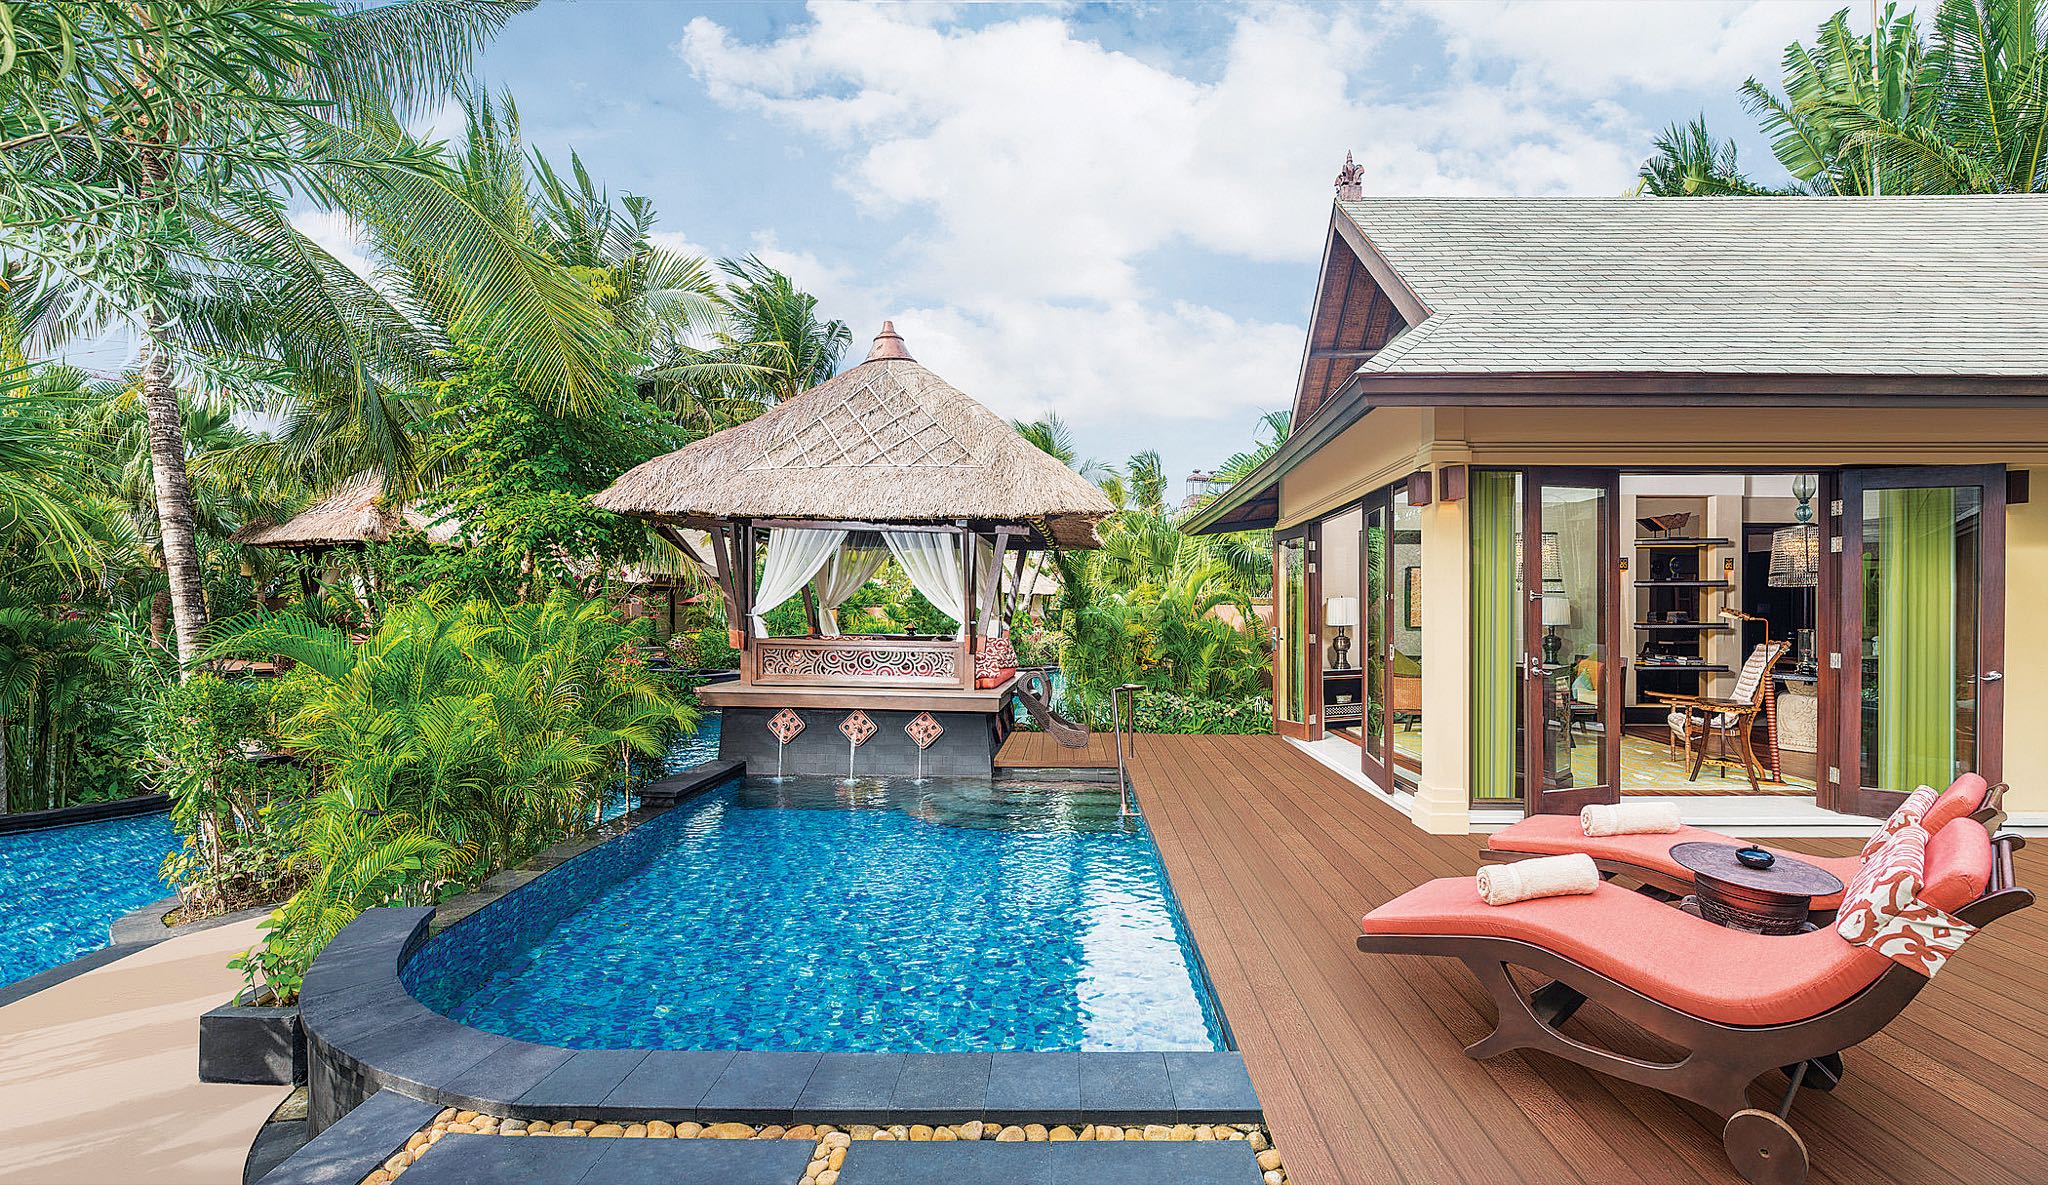 St. Regis Langkawi's Pool Suite - An Island Paradise - The Luxeologist